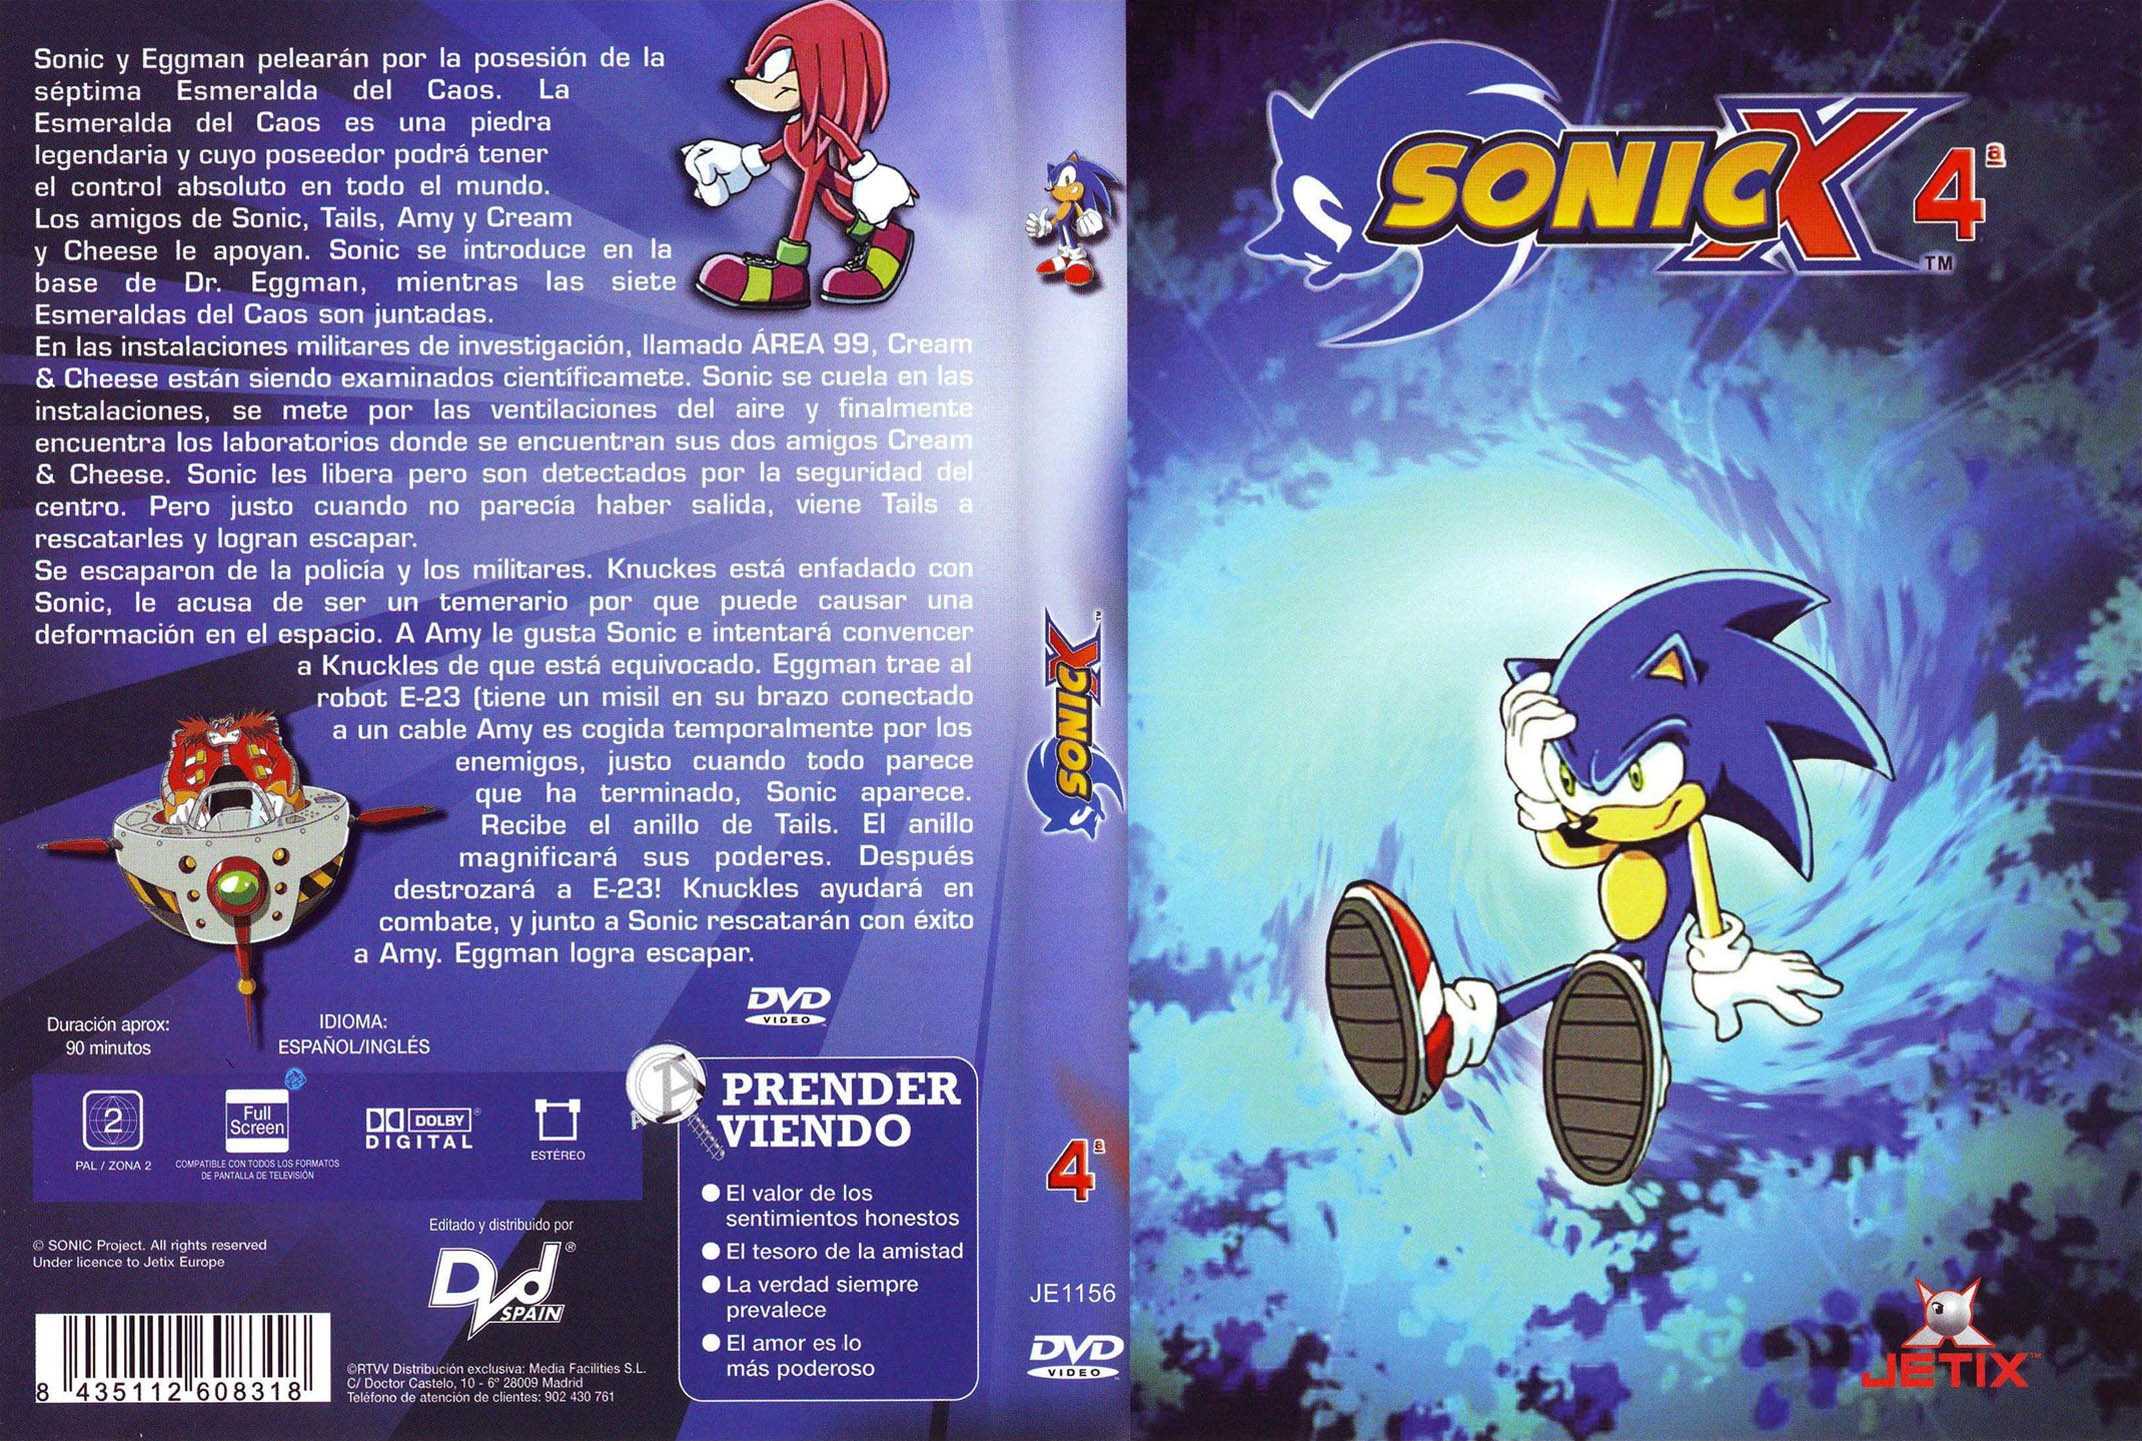 This page is protected.You can view its source e. SonicX DVD ES Box 4.jpg. 